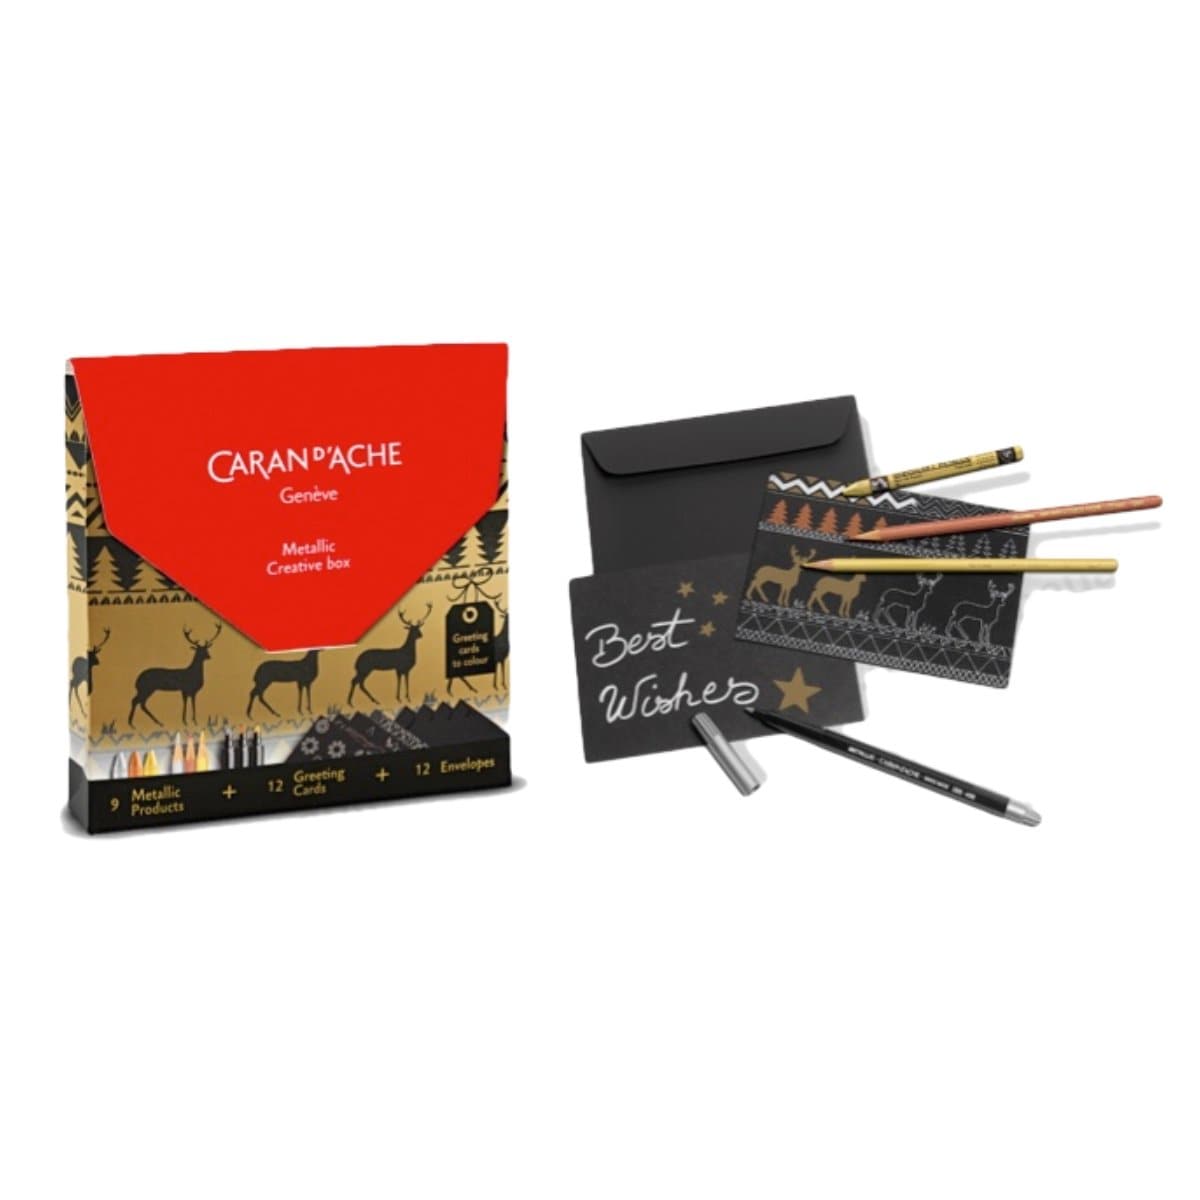 CARAN D'ACHE Metallic Creative Box, 9 metallic products and 12 Cards with envelopes